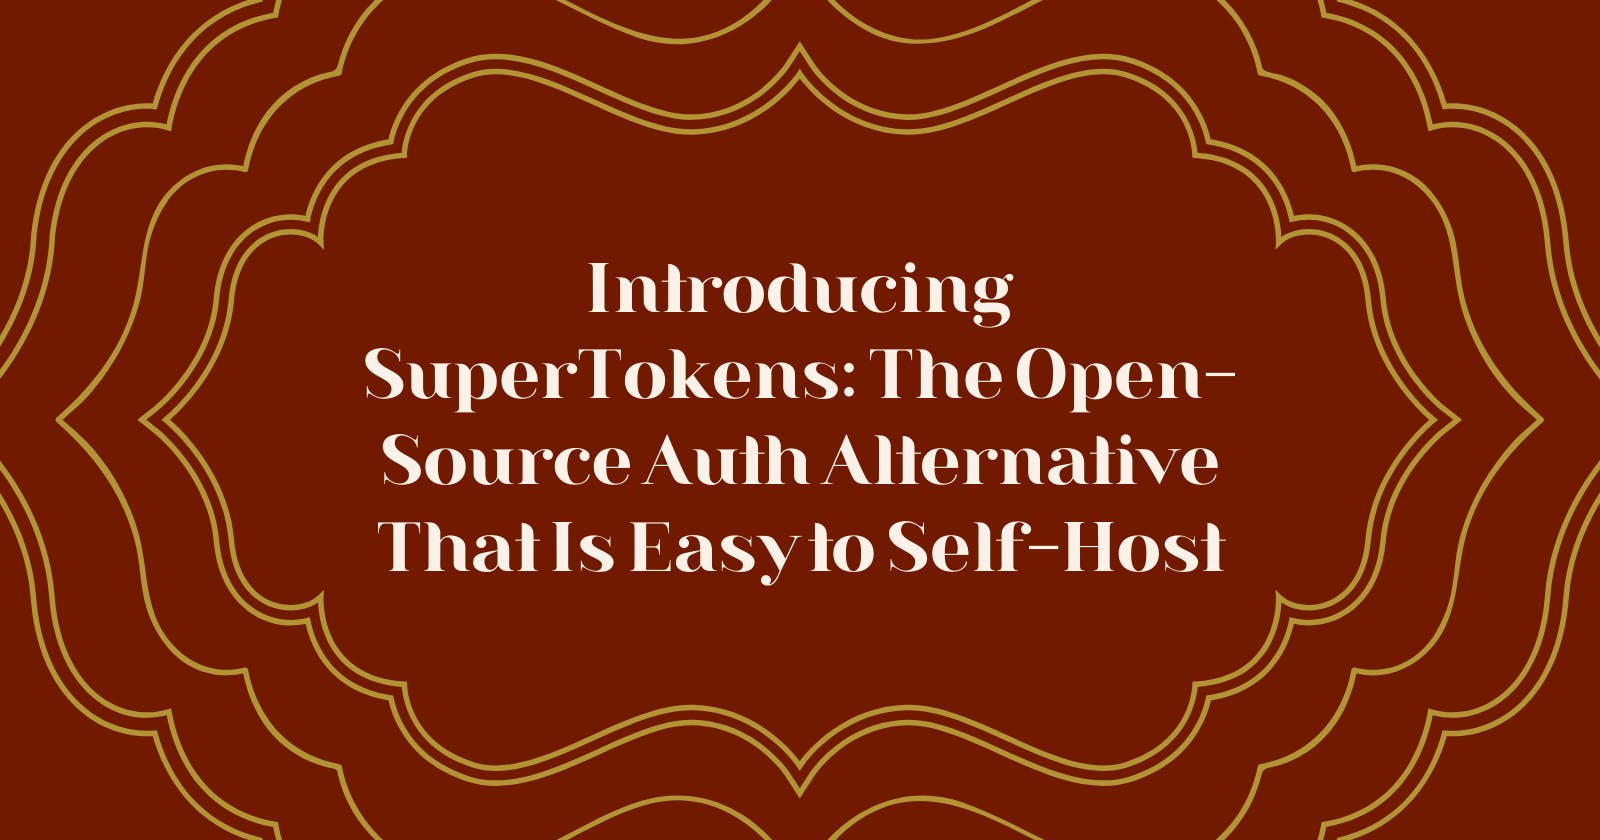 Introducing SuperTokens: The Open-Source Auth Alternative That Is Easy to Self-Host